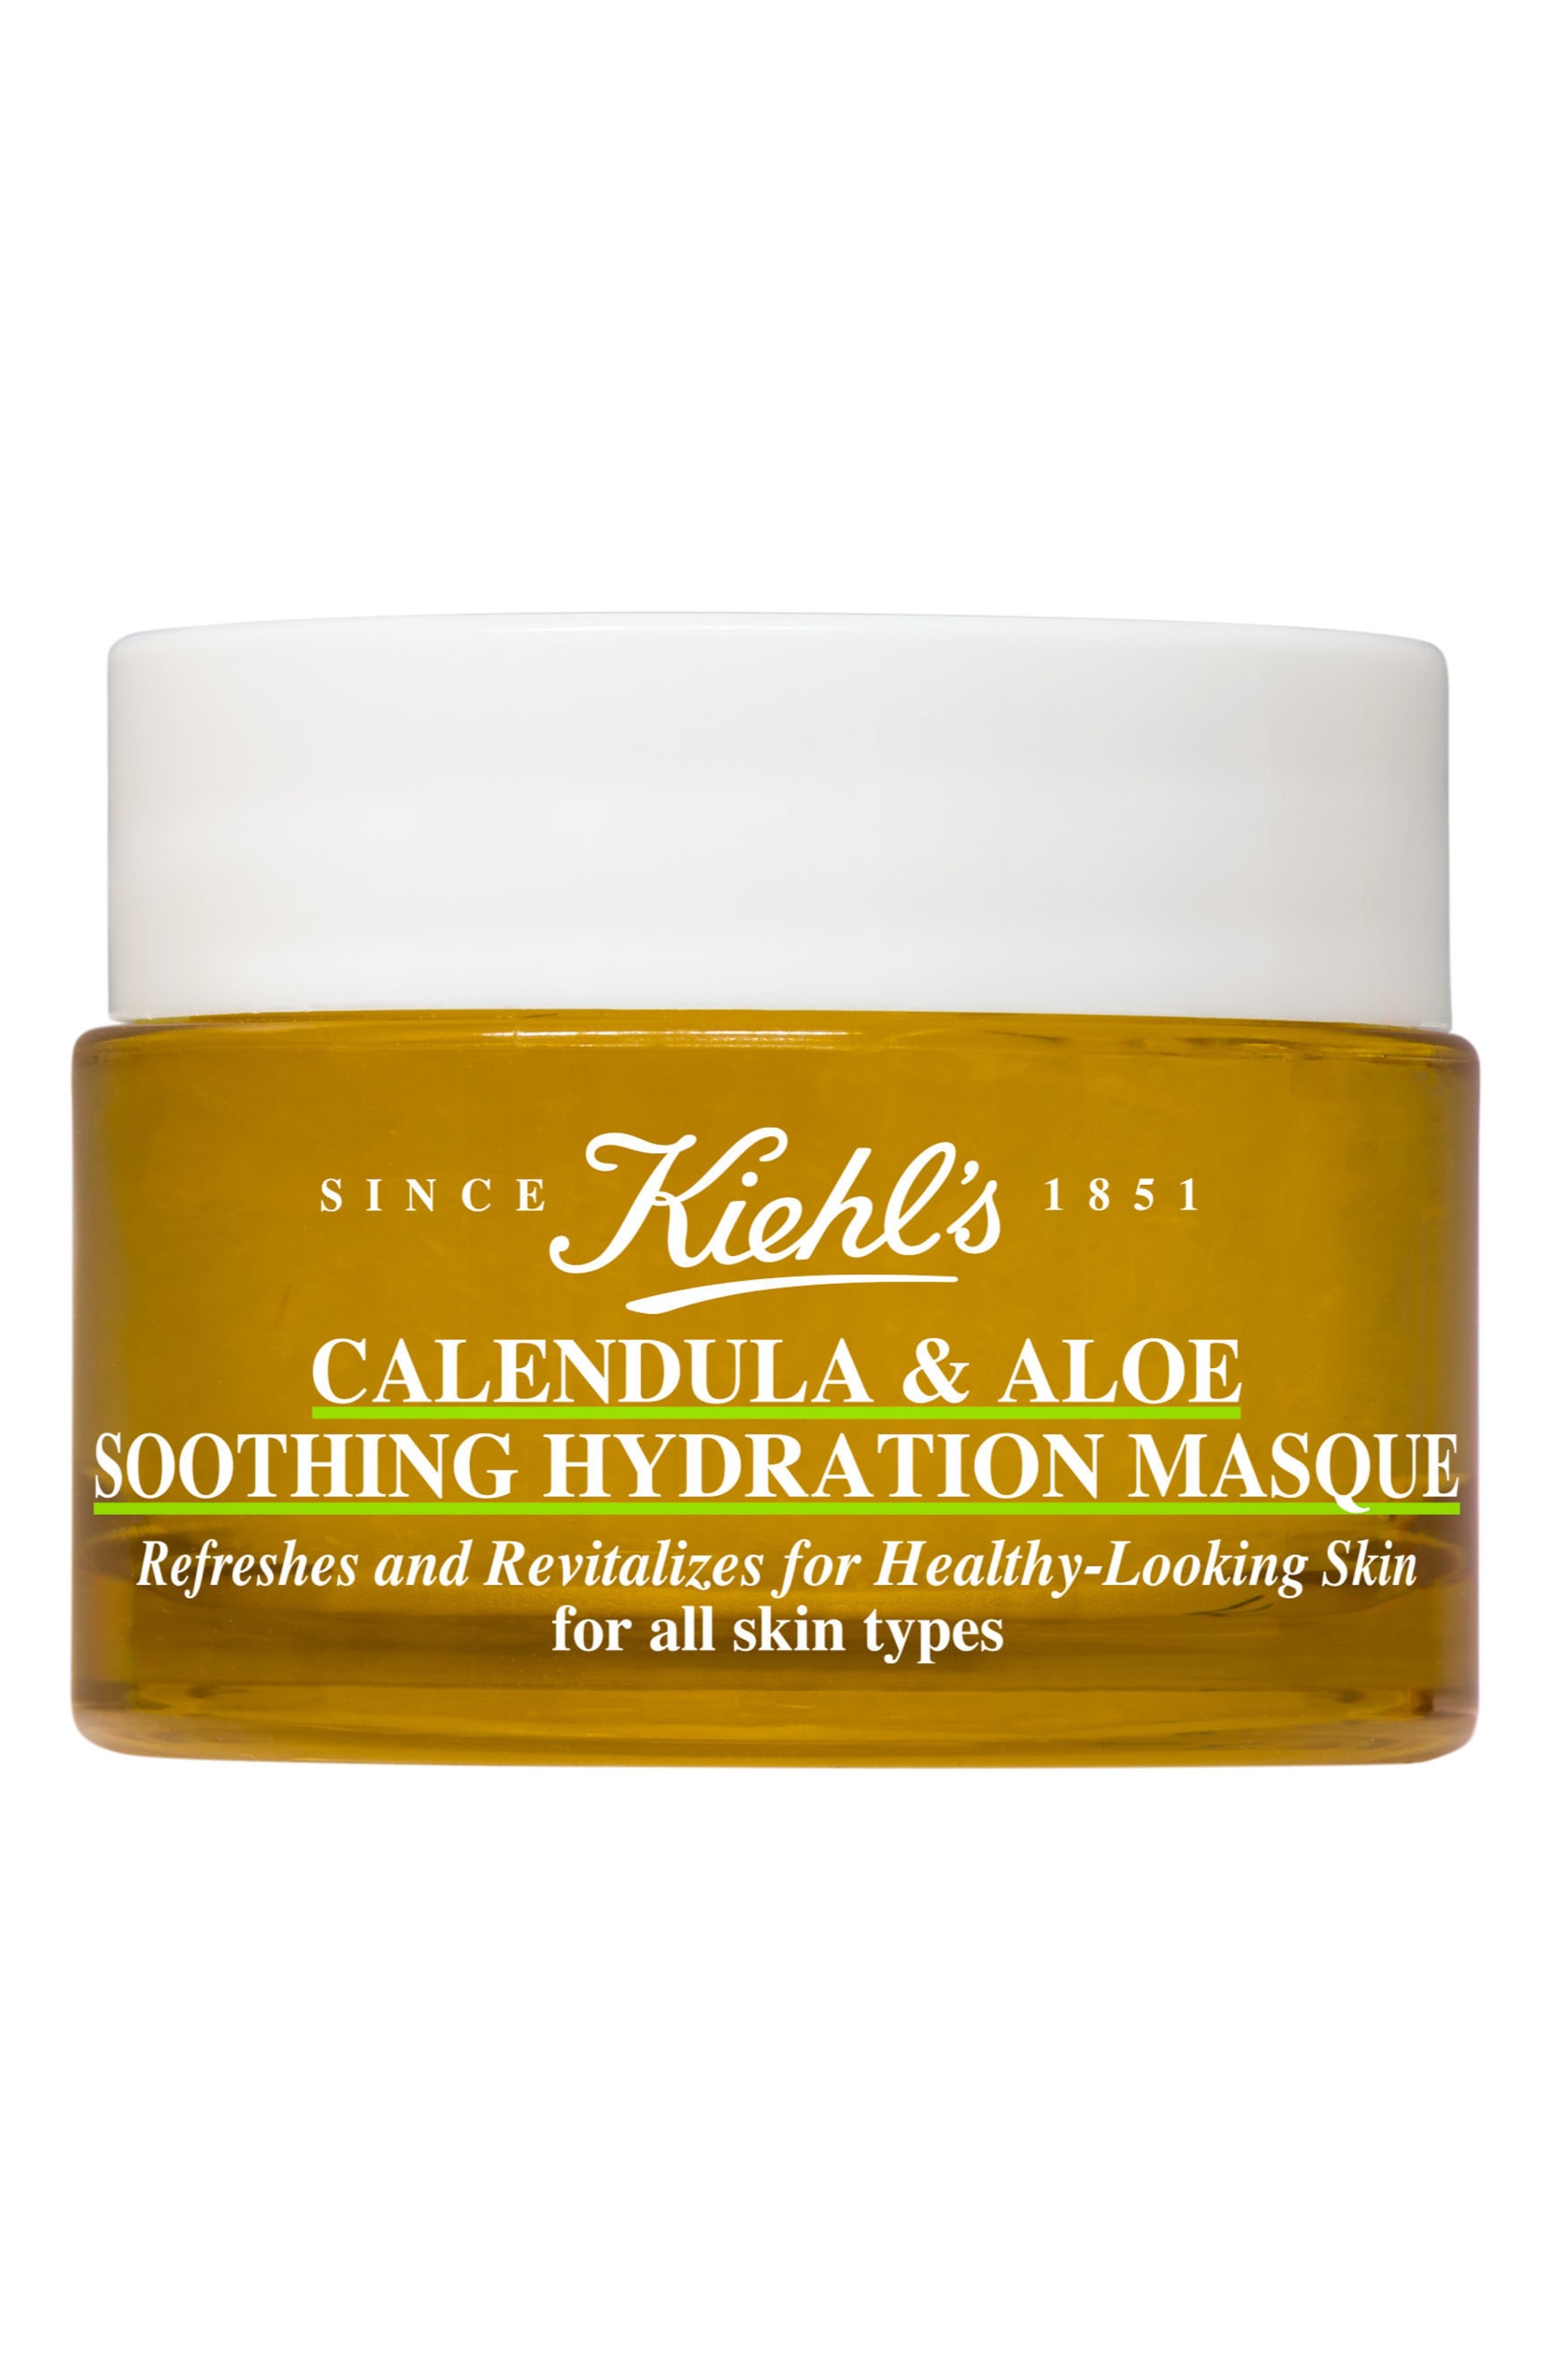 Soothing Hydration Masque ($45)